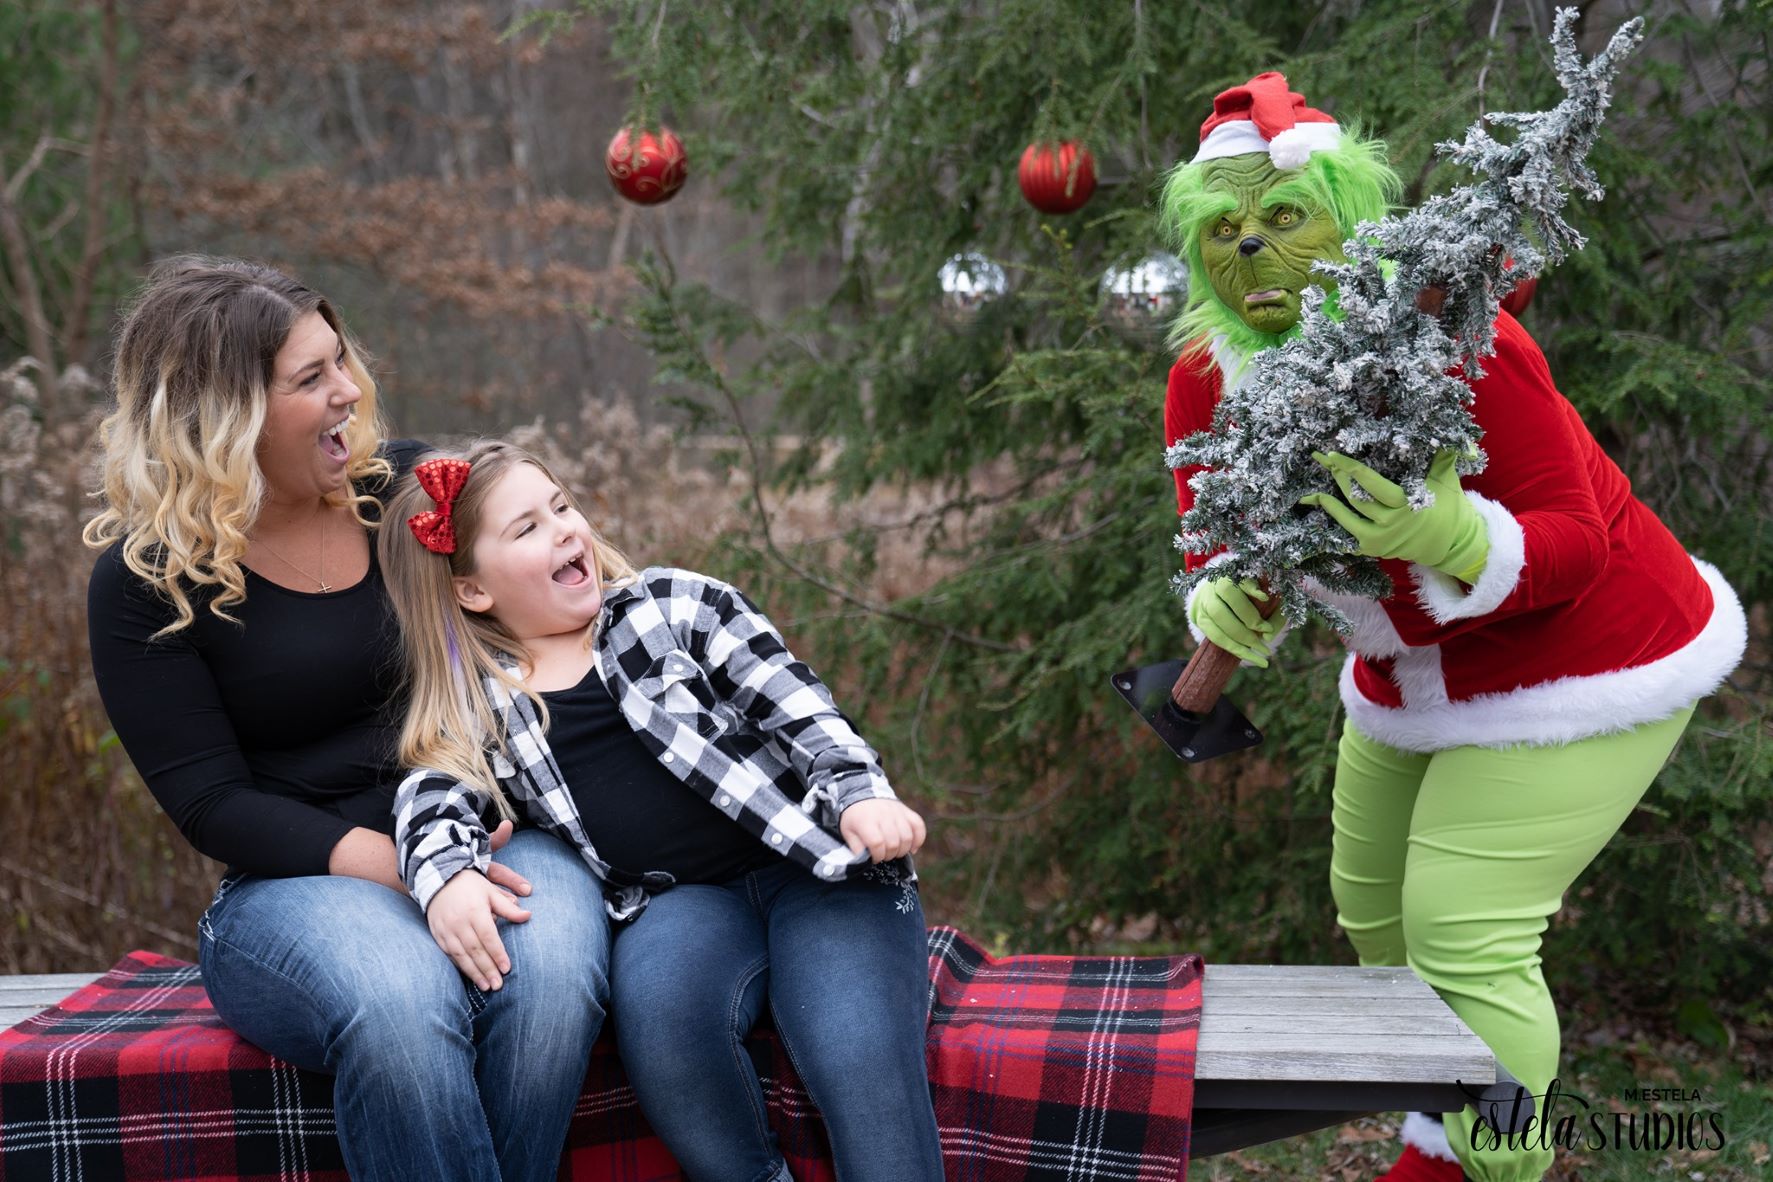 Movement Mortgage: Christmas Photos with the Grinch!